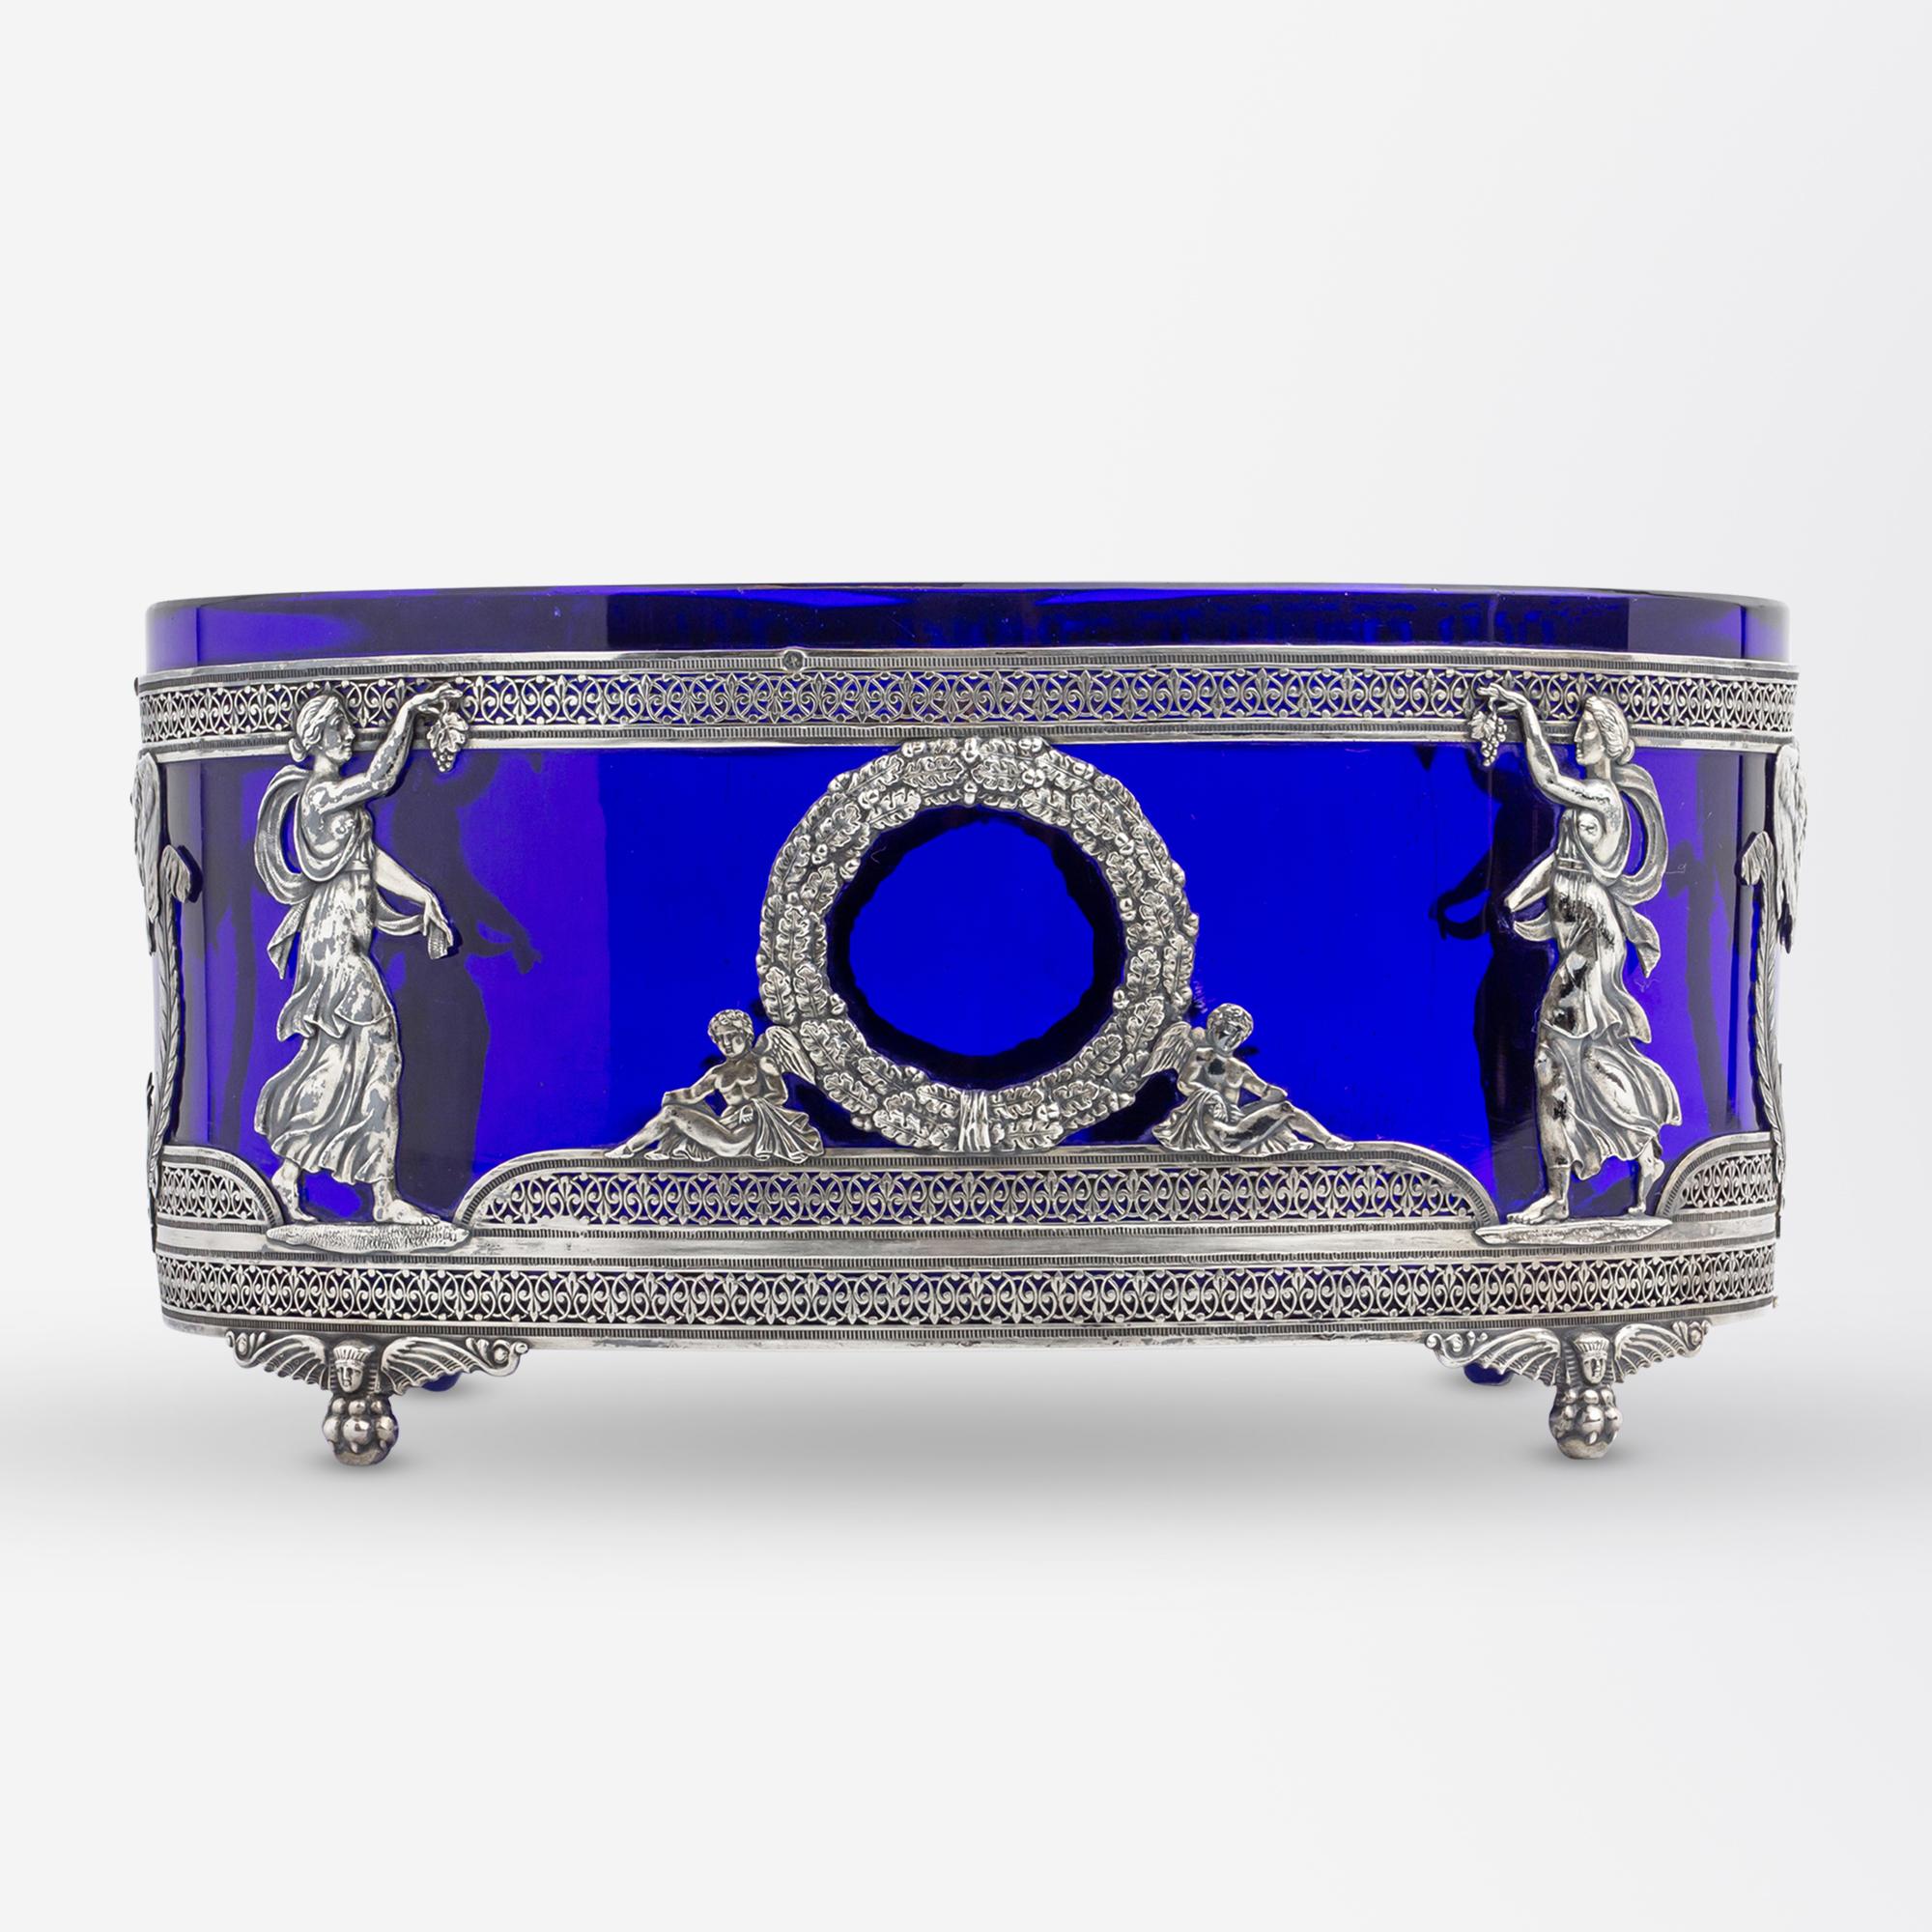 This oval jardiniere which has been crafted from silver and cobalt blue glass dates to France at the end of the 19th Century. The neoclassical jardiniere features Roman or Greek goddesses holding grapes facing toward a central wreath supported by a